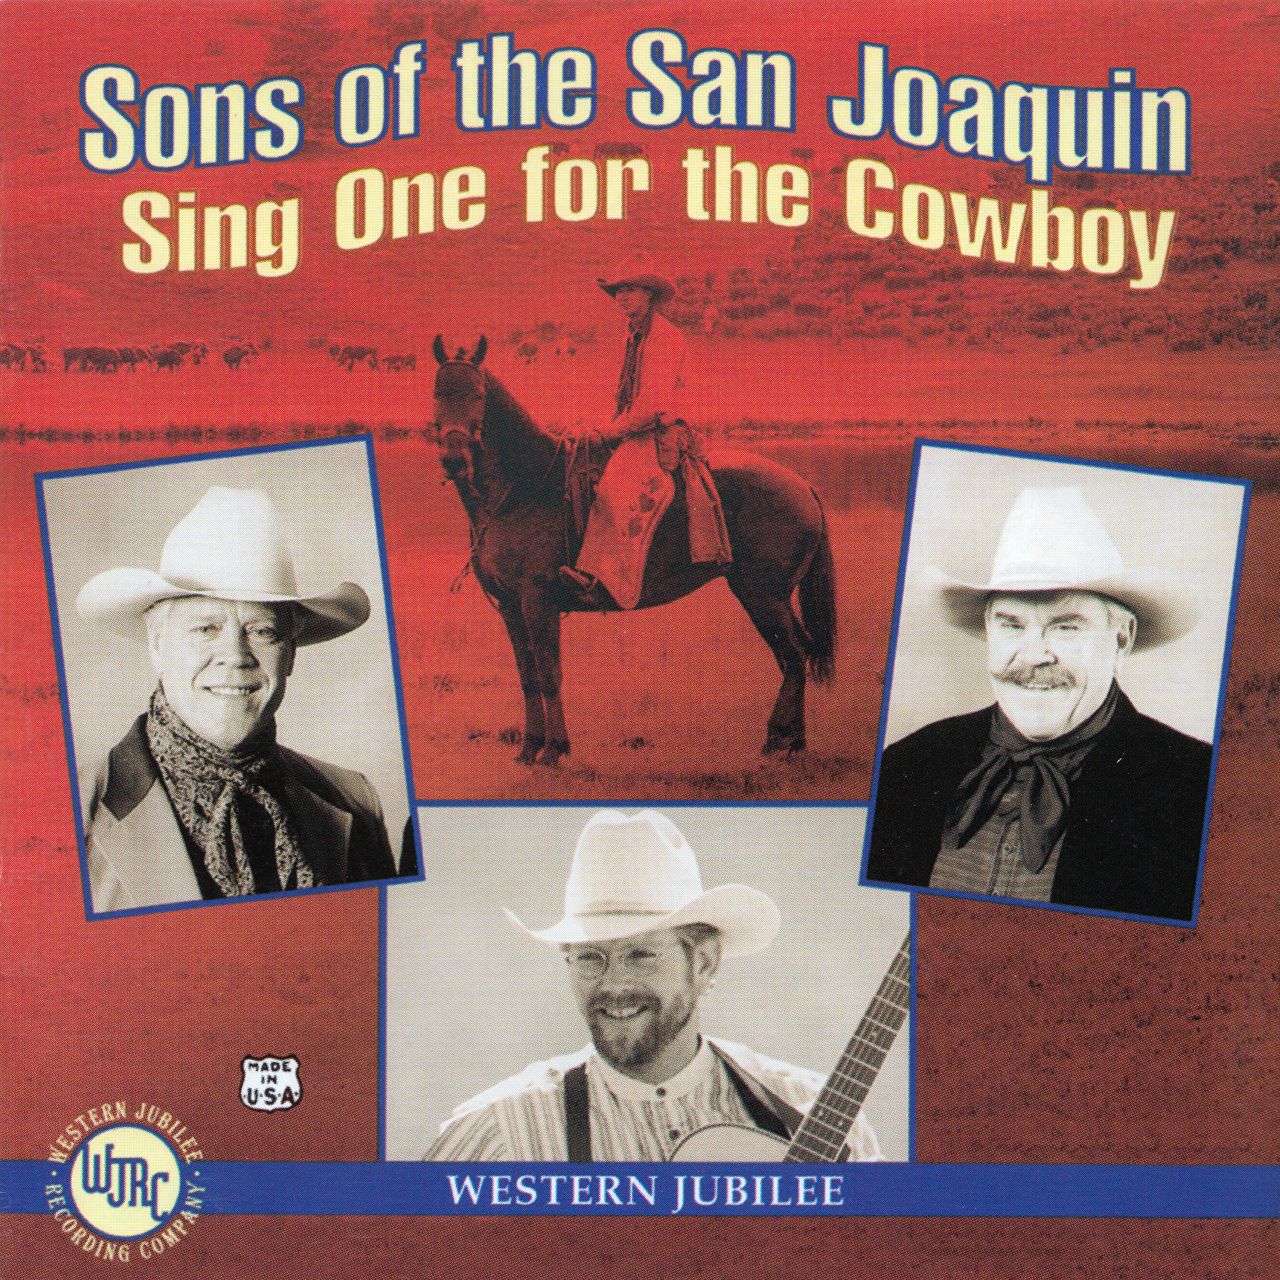 Sons Of The San Joaquin - Sing One For The Cowboy cover album